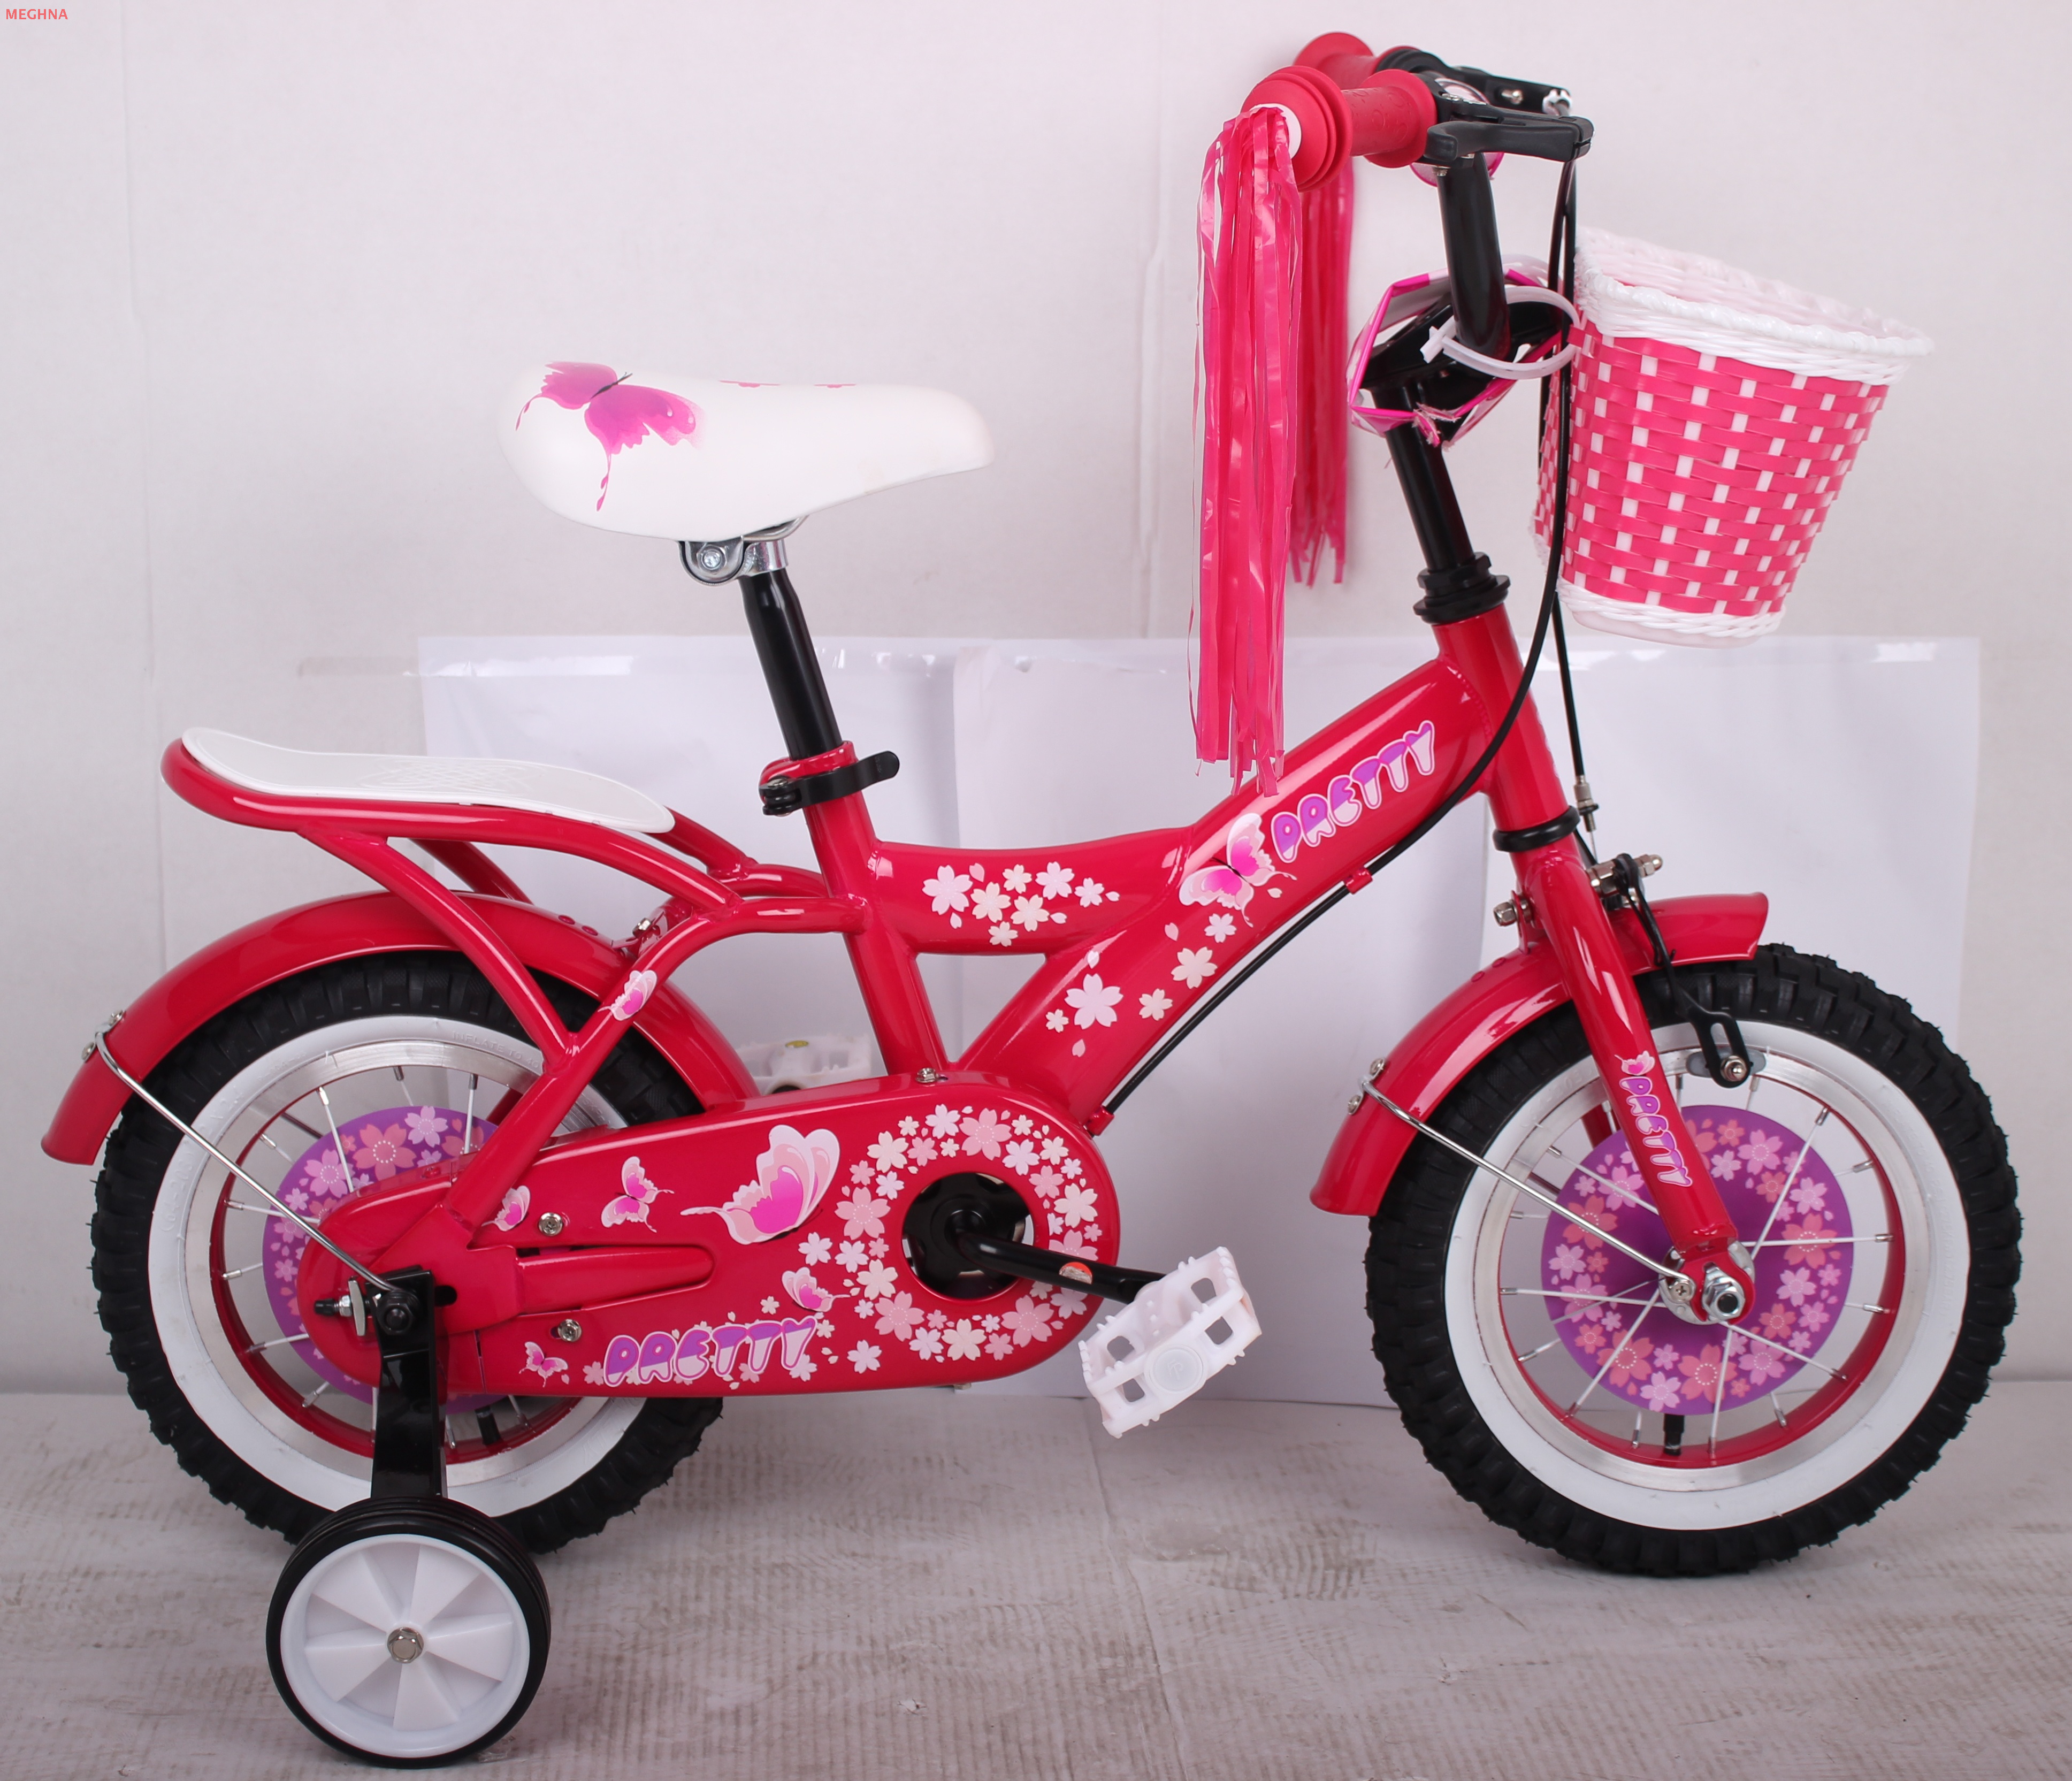 Pretty 12 16 20 inch children bicycle /girl bicycle